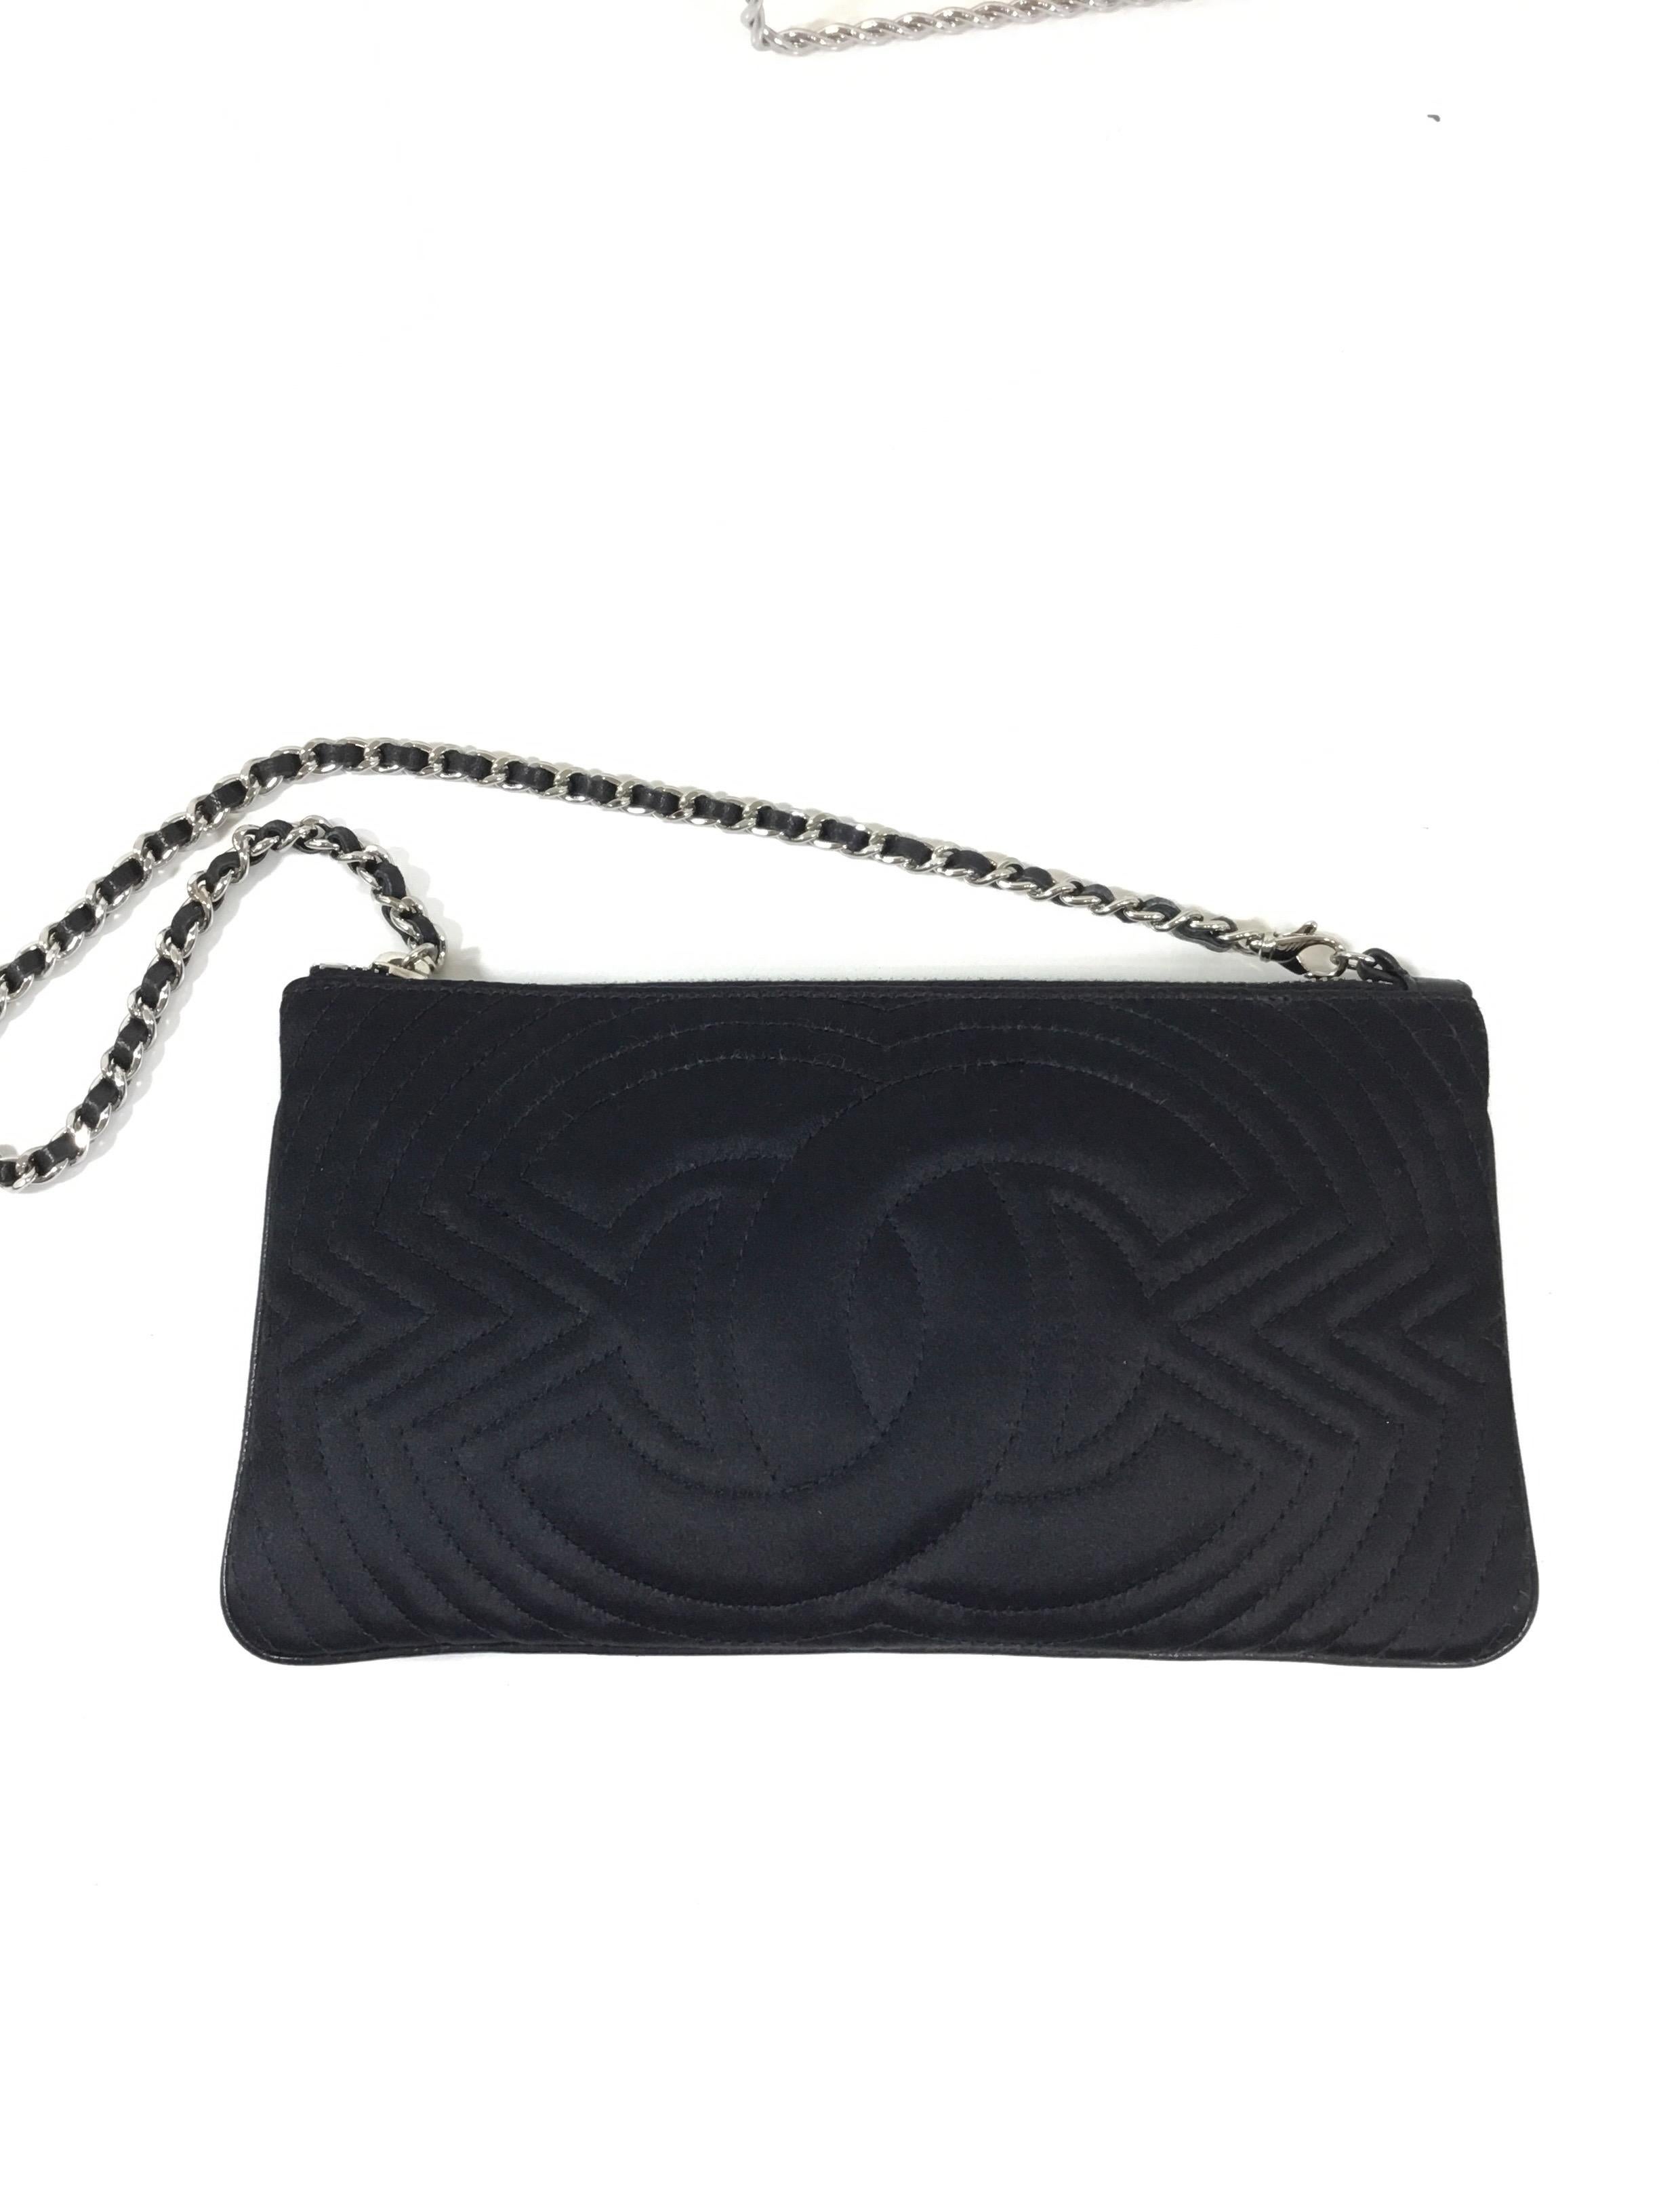 Black Chanel Quilted Clutch, 2004-2005